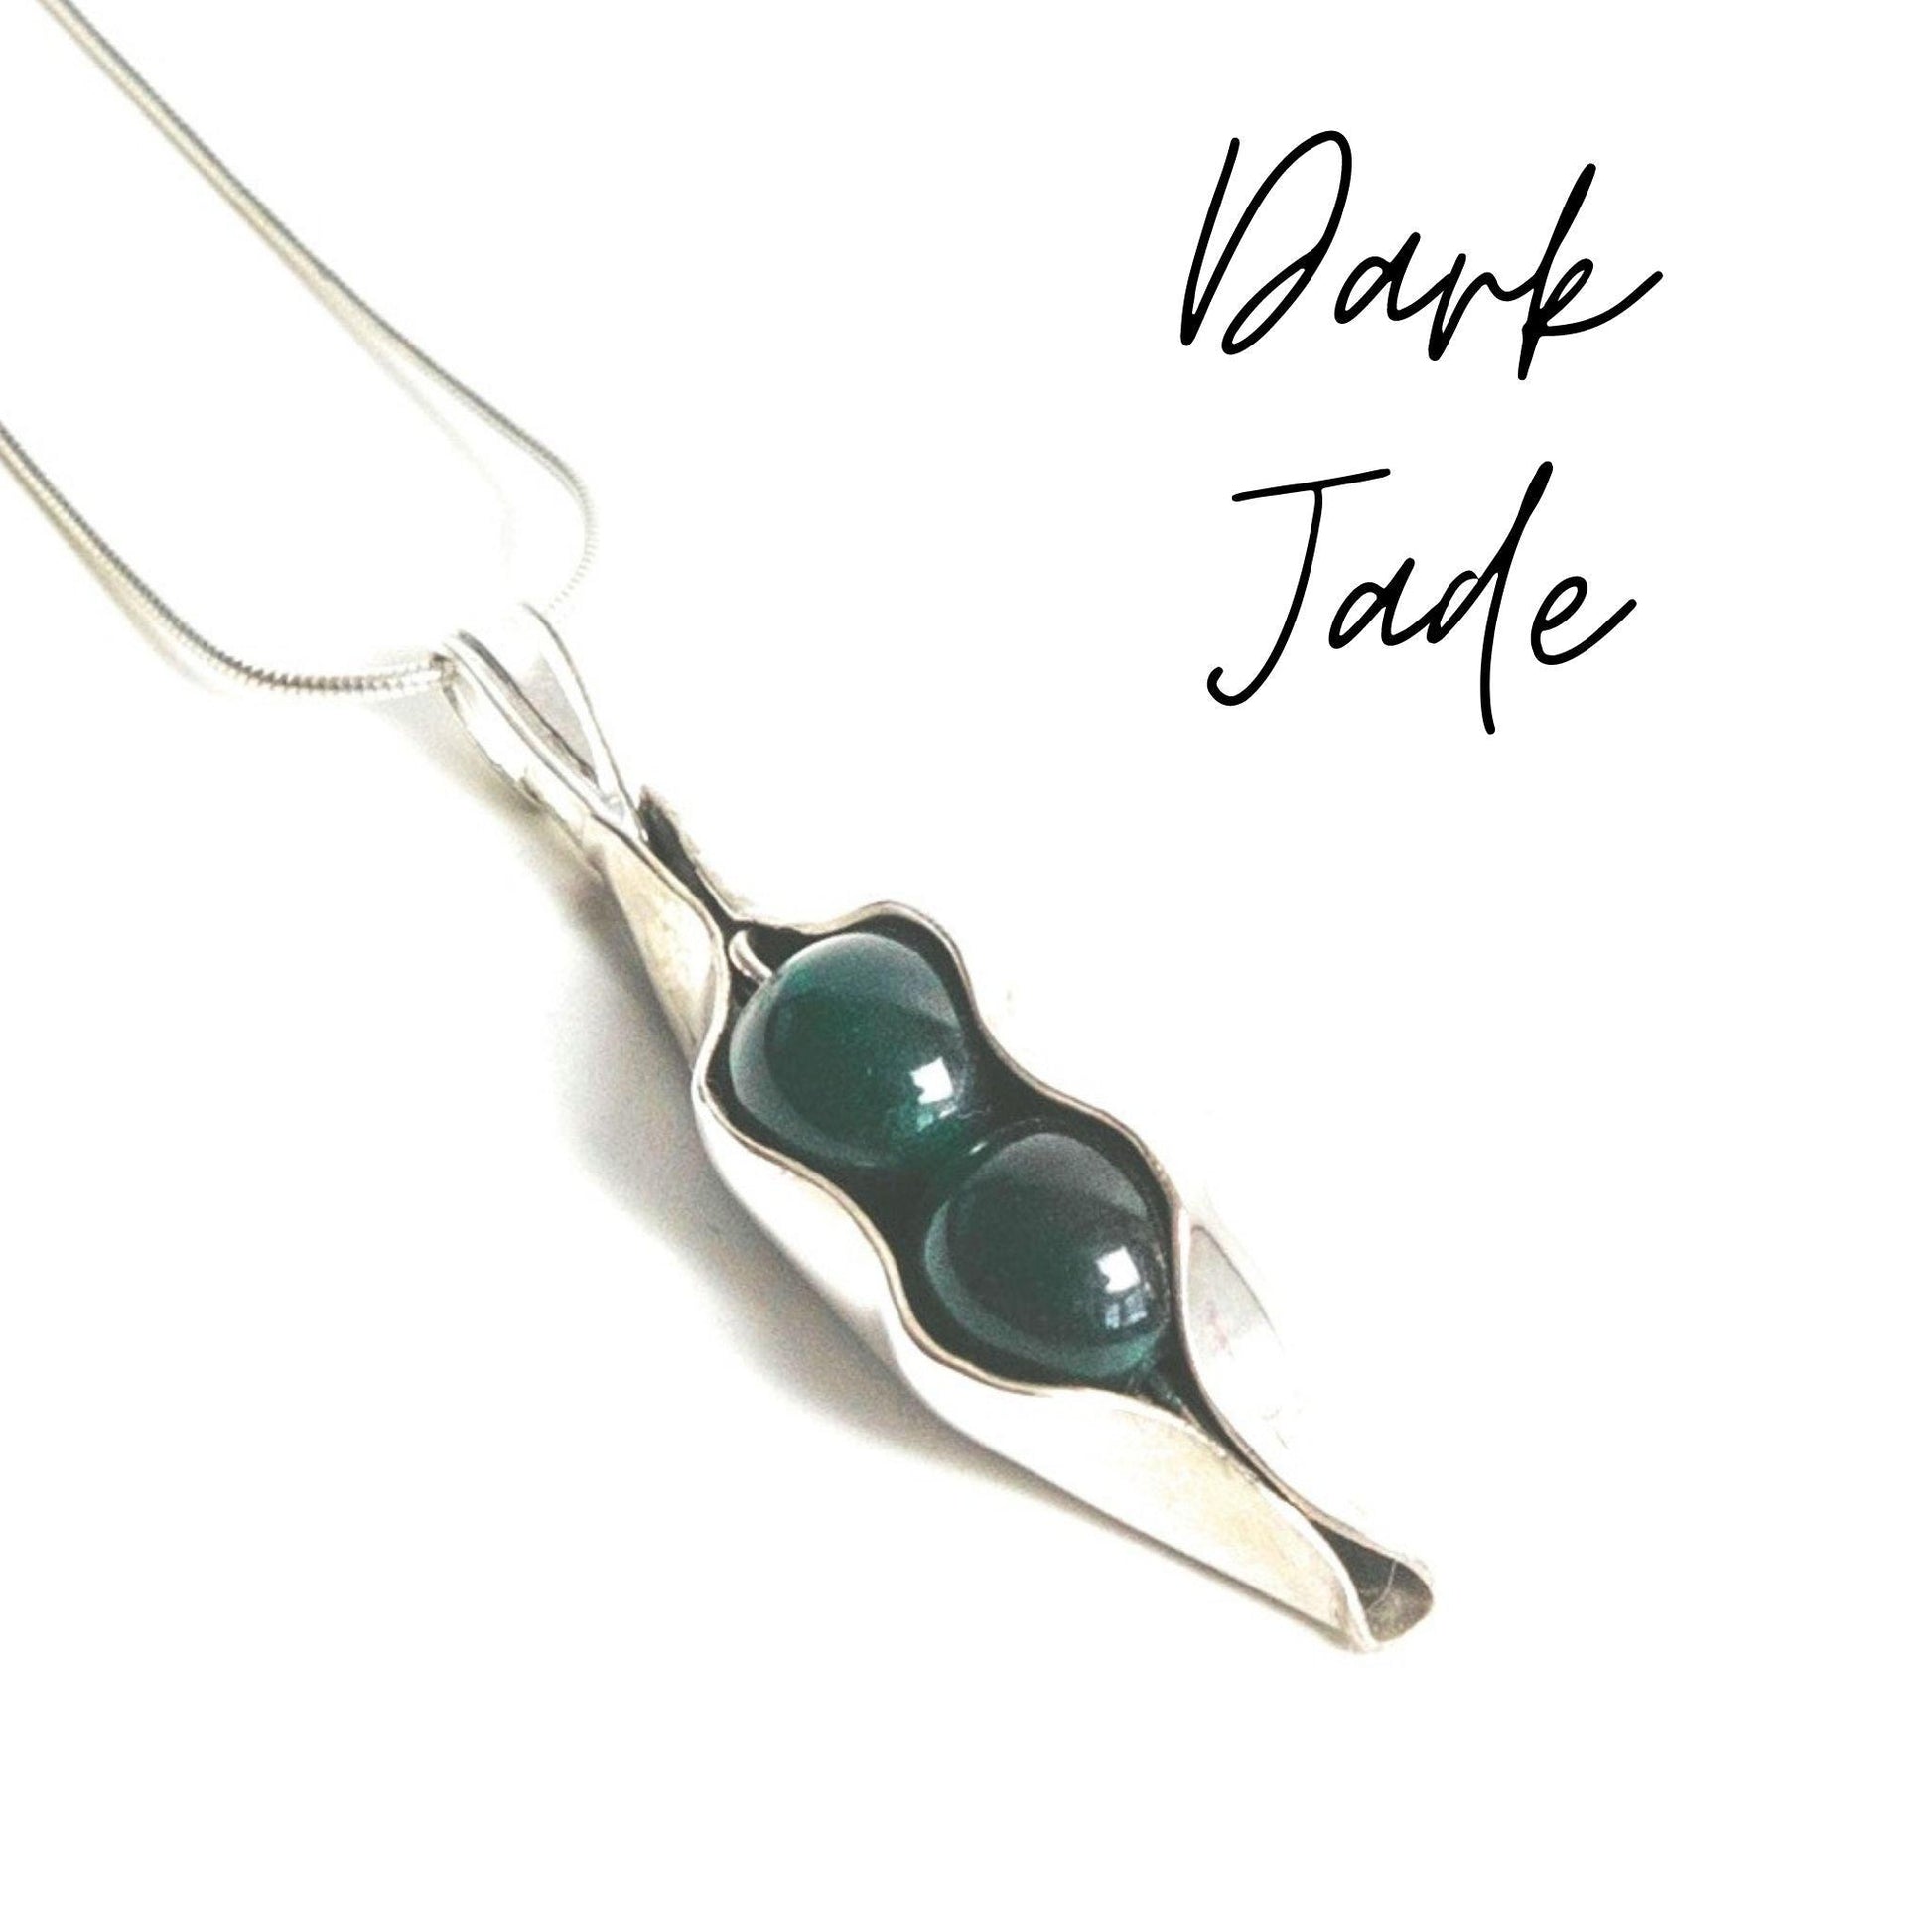 35th Jade anniversary gift set | Two peas In a pod | Necklace & Earrings | Jade jewellery for women | Jade necklace | 35th Anniversary wife | Engraved Initials - RACHEL SHRIEVES DESIGN